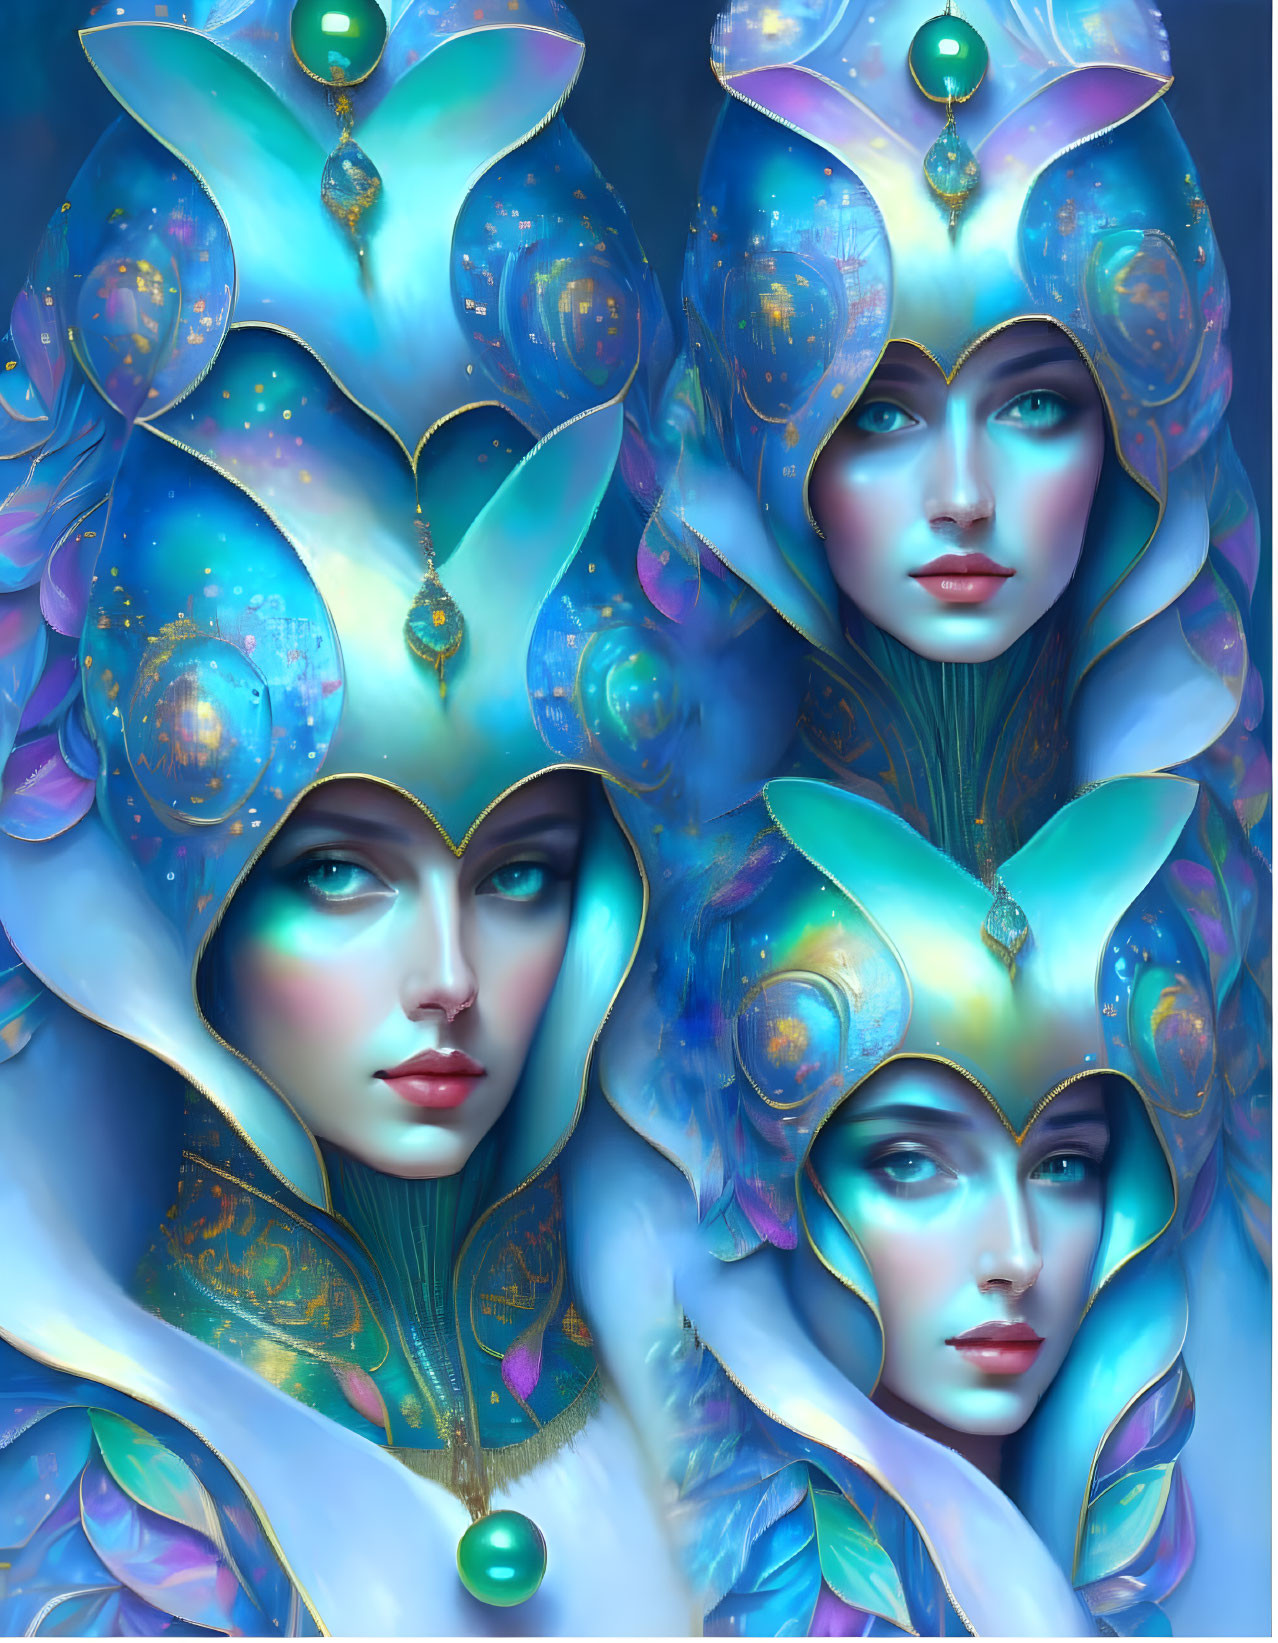 Four identical fantasy female faces with blue and gold headpieces against cool backdrop